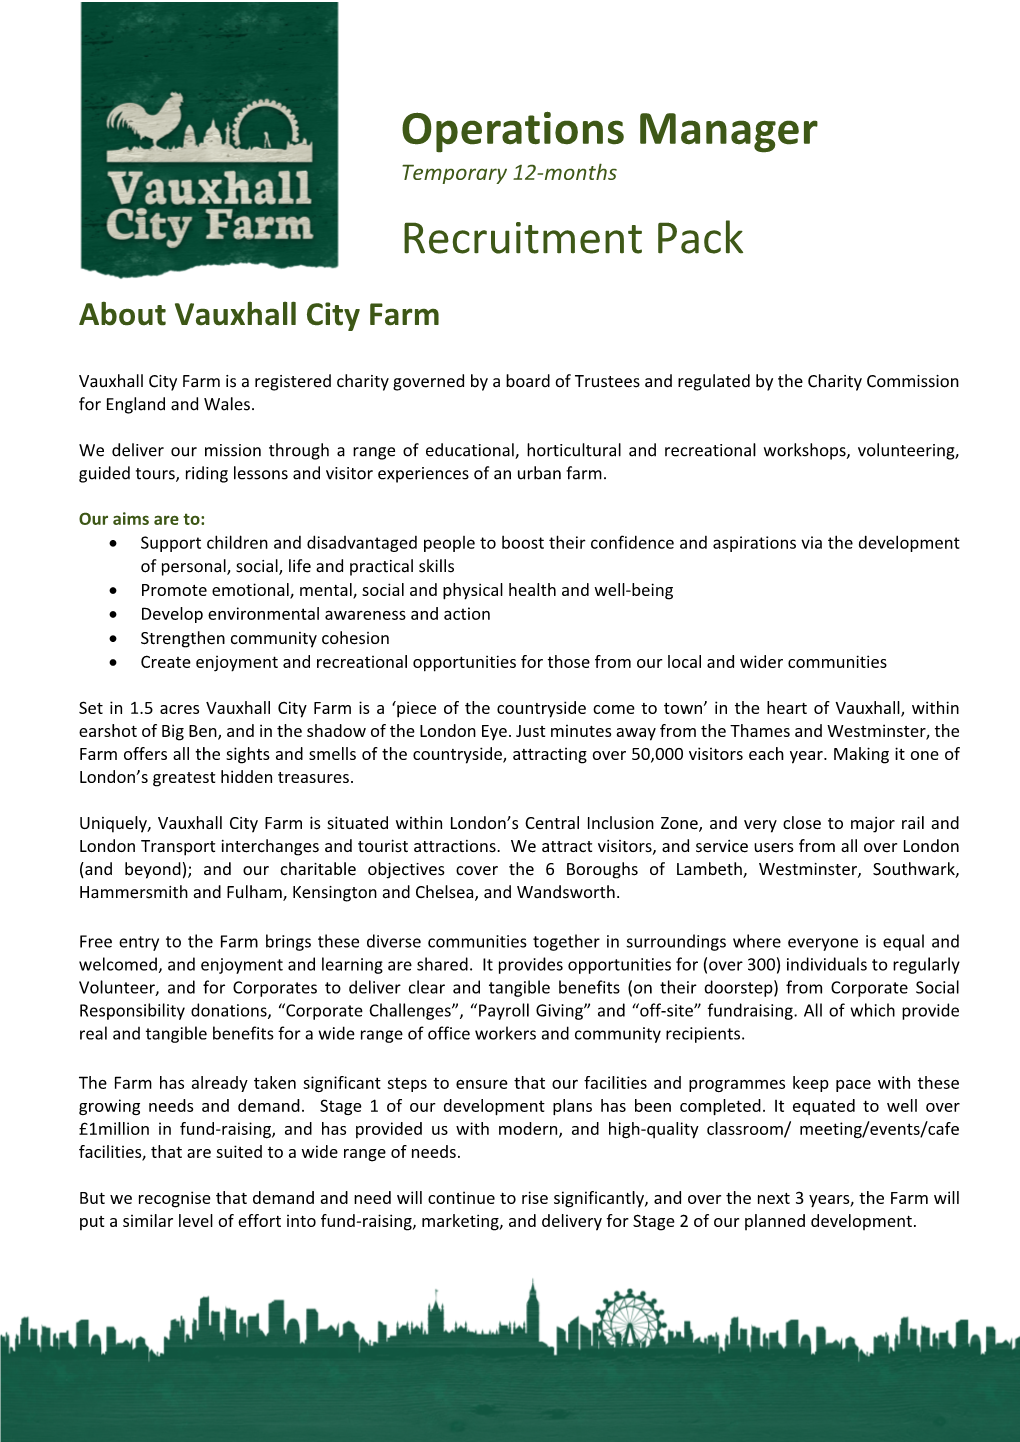 Operations Manager Recruitment Pack